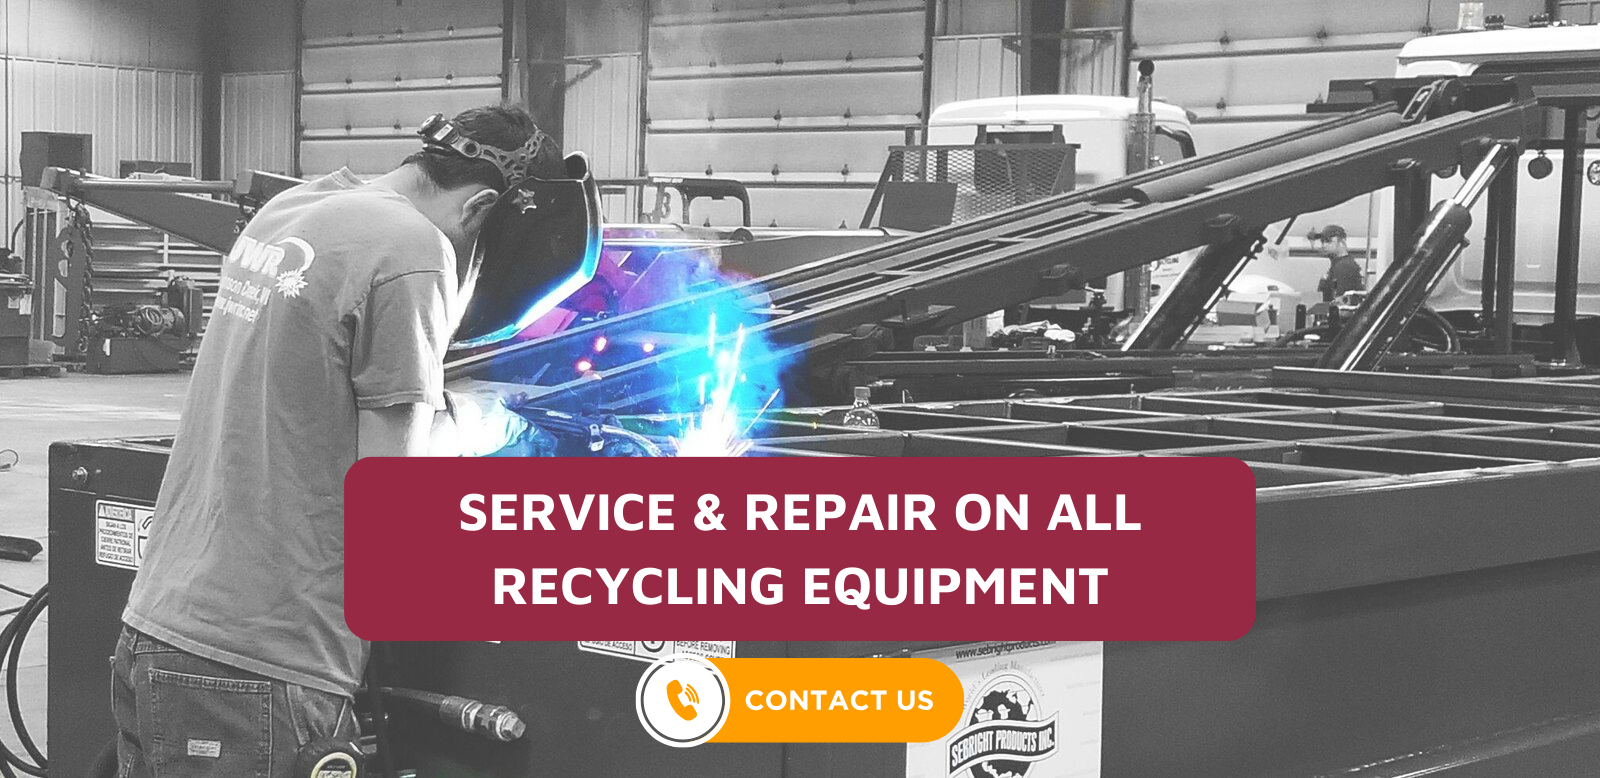 Recycling Equipment Service and Repair